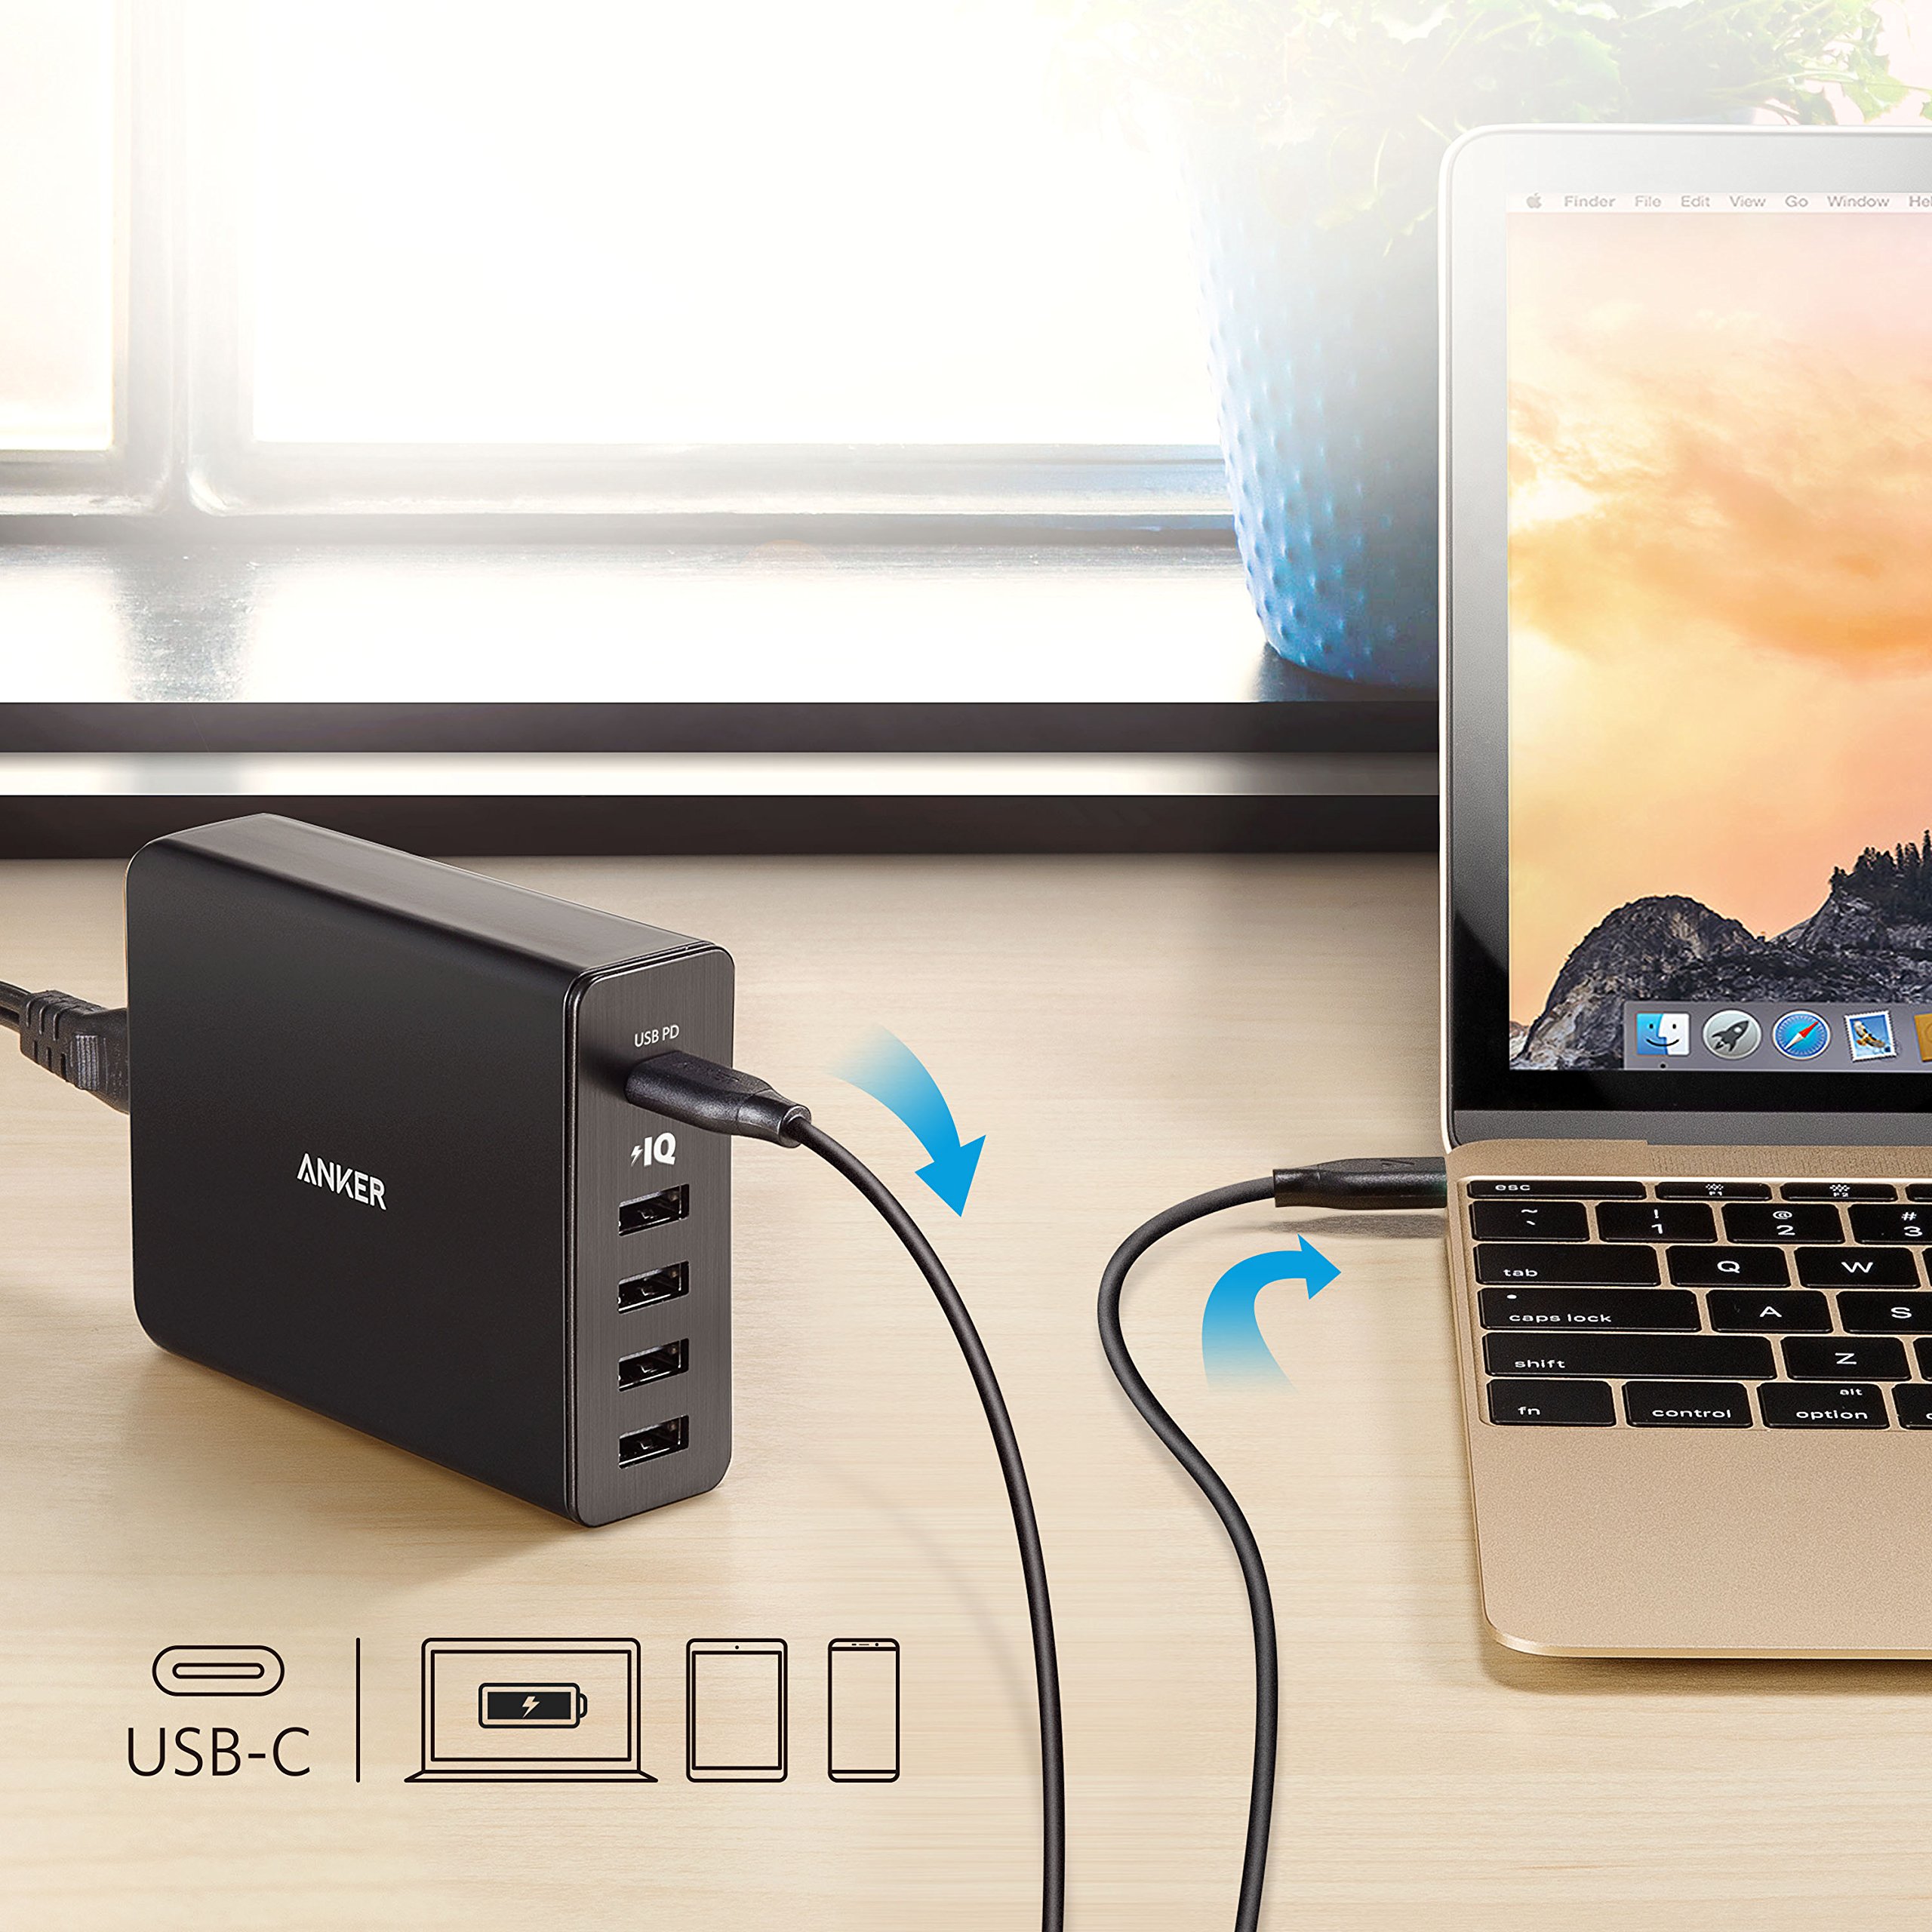 XINKSD Quick Charge 3.0 60W 6-Port USB Wall Charger, PowerPort+ 6 for Galaxy S9/S8/S7/S6/Edge/Plus, Note 5/4 and PowerIQ for iPhone XR/X/8/7/6s/Plus, iPad Pro, LG, Nexus, HTC and More (Black)